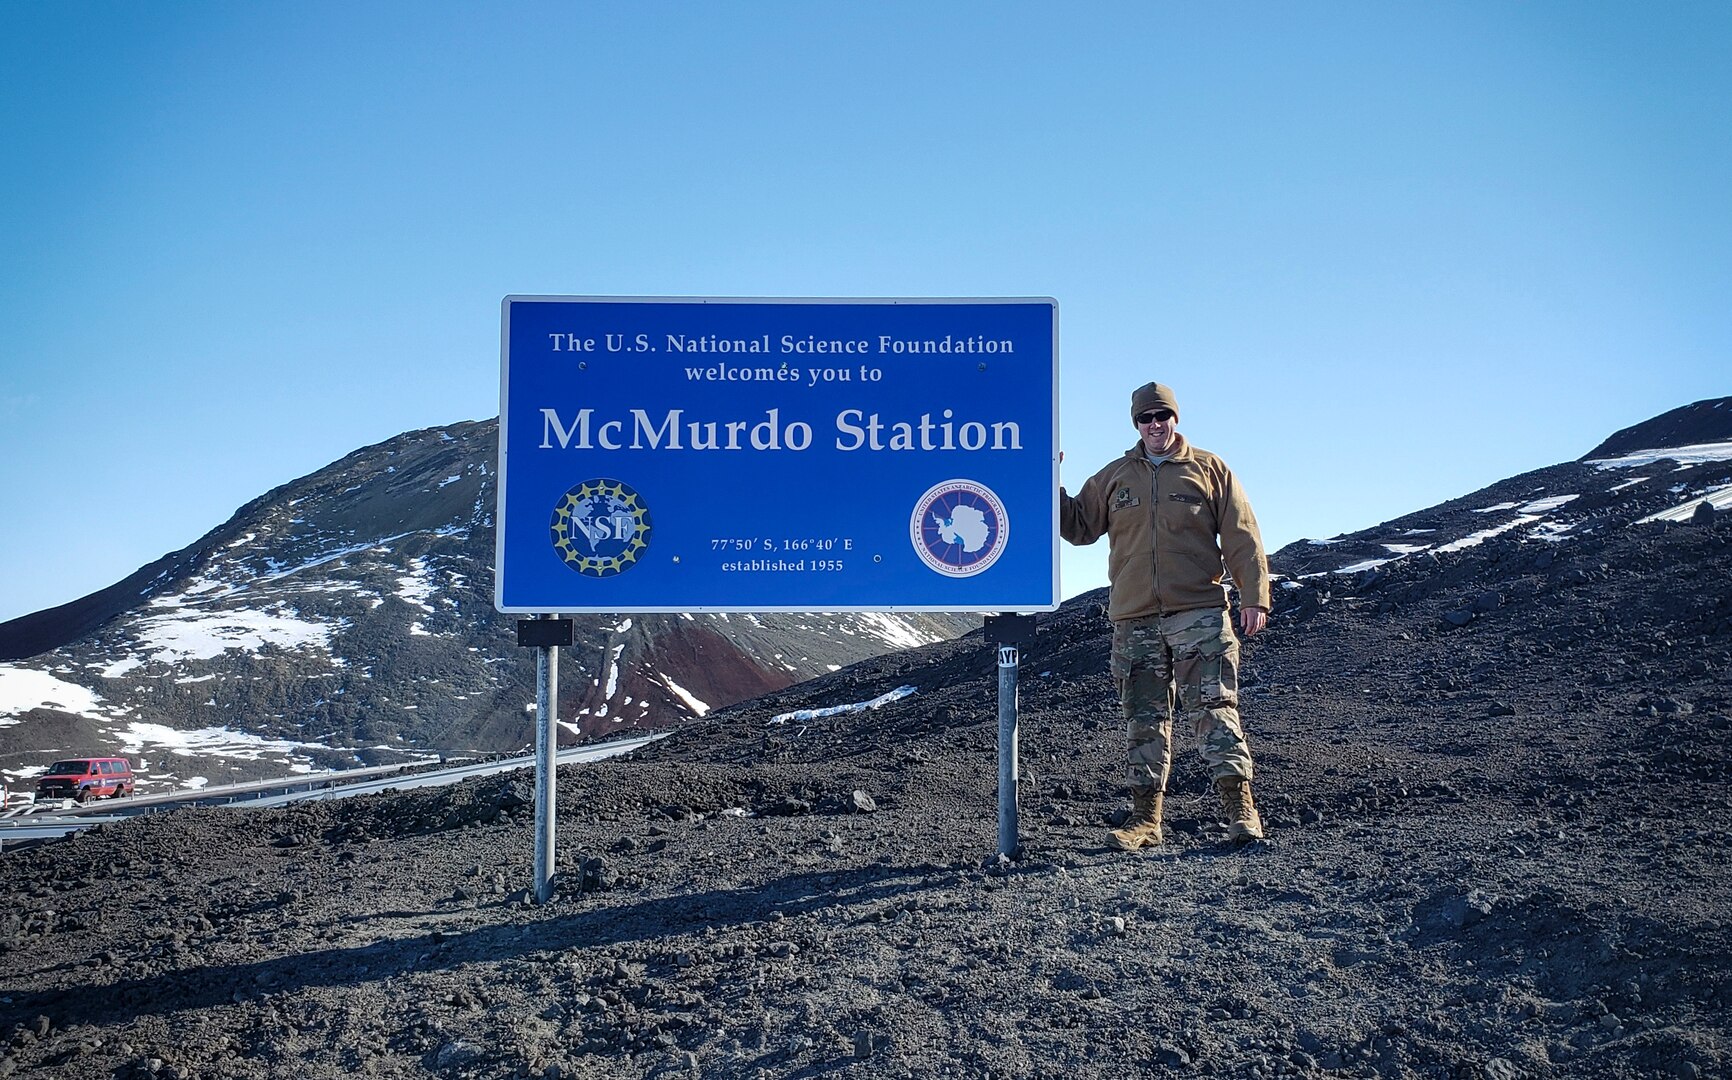 Master Sgt. Justin Rogers, occupational safety specialist, 108th Wing, New Jersey Air National Guard, stands near the marker of McMurdo Station, Antarctica, Nov. 8, 2019. Rogers backfilled as the 109th safety manager while at McMurdo Station.